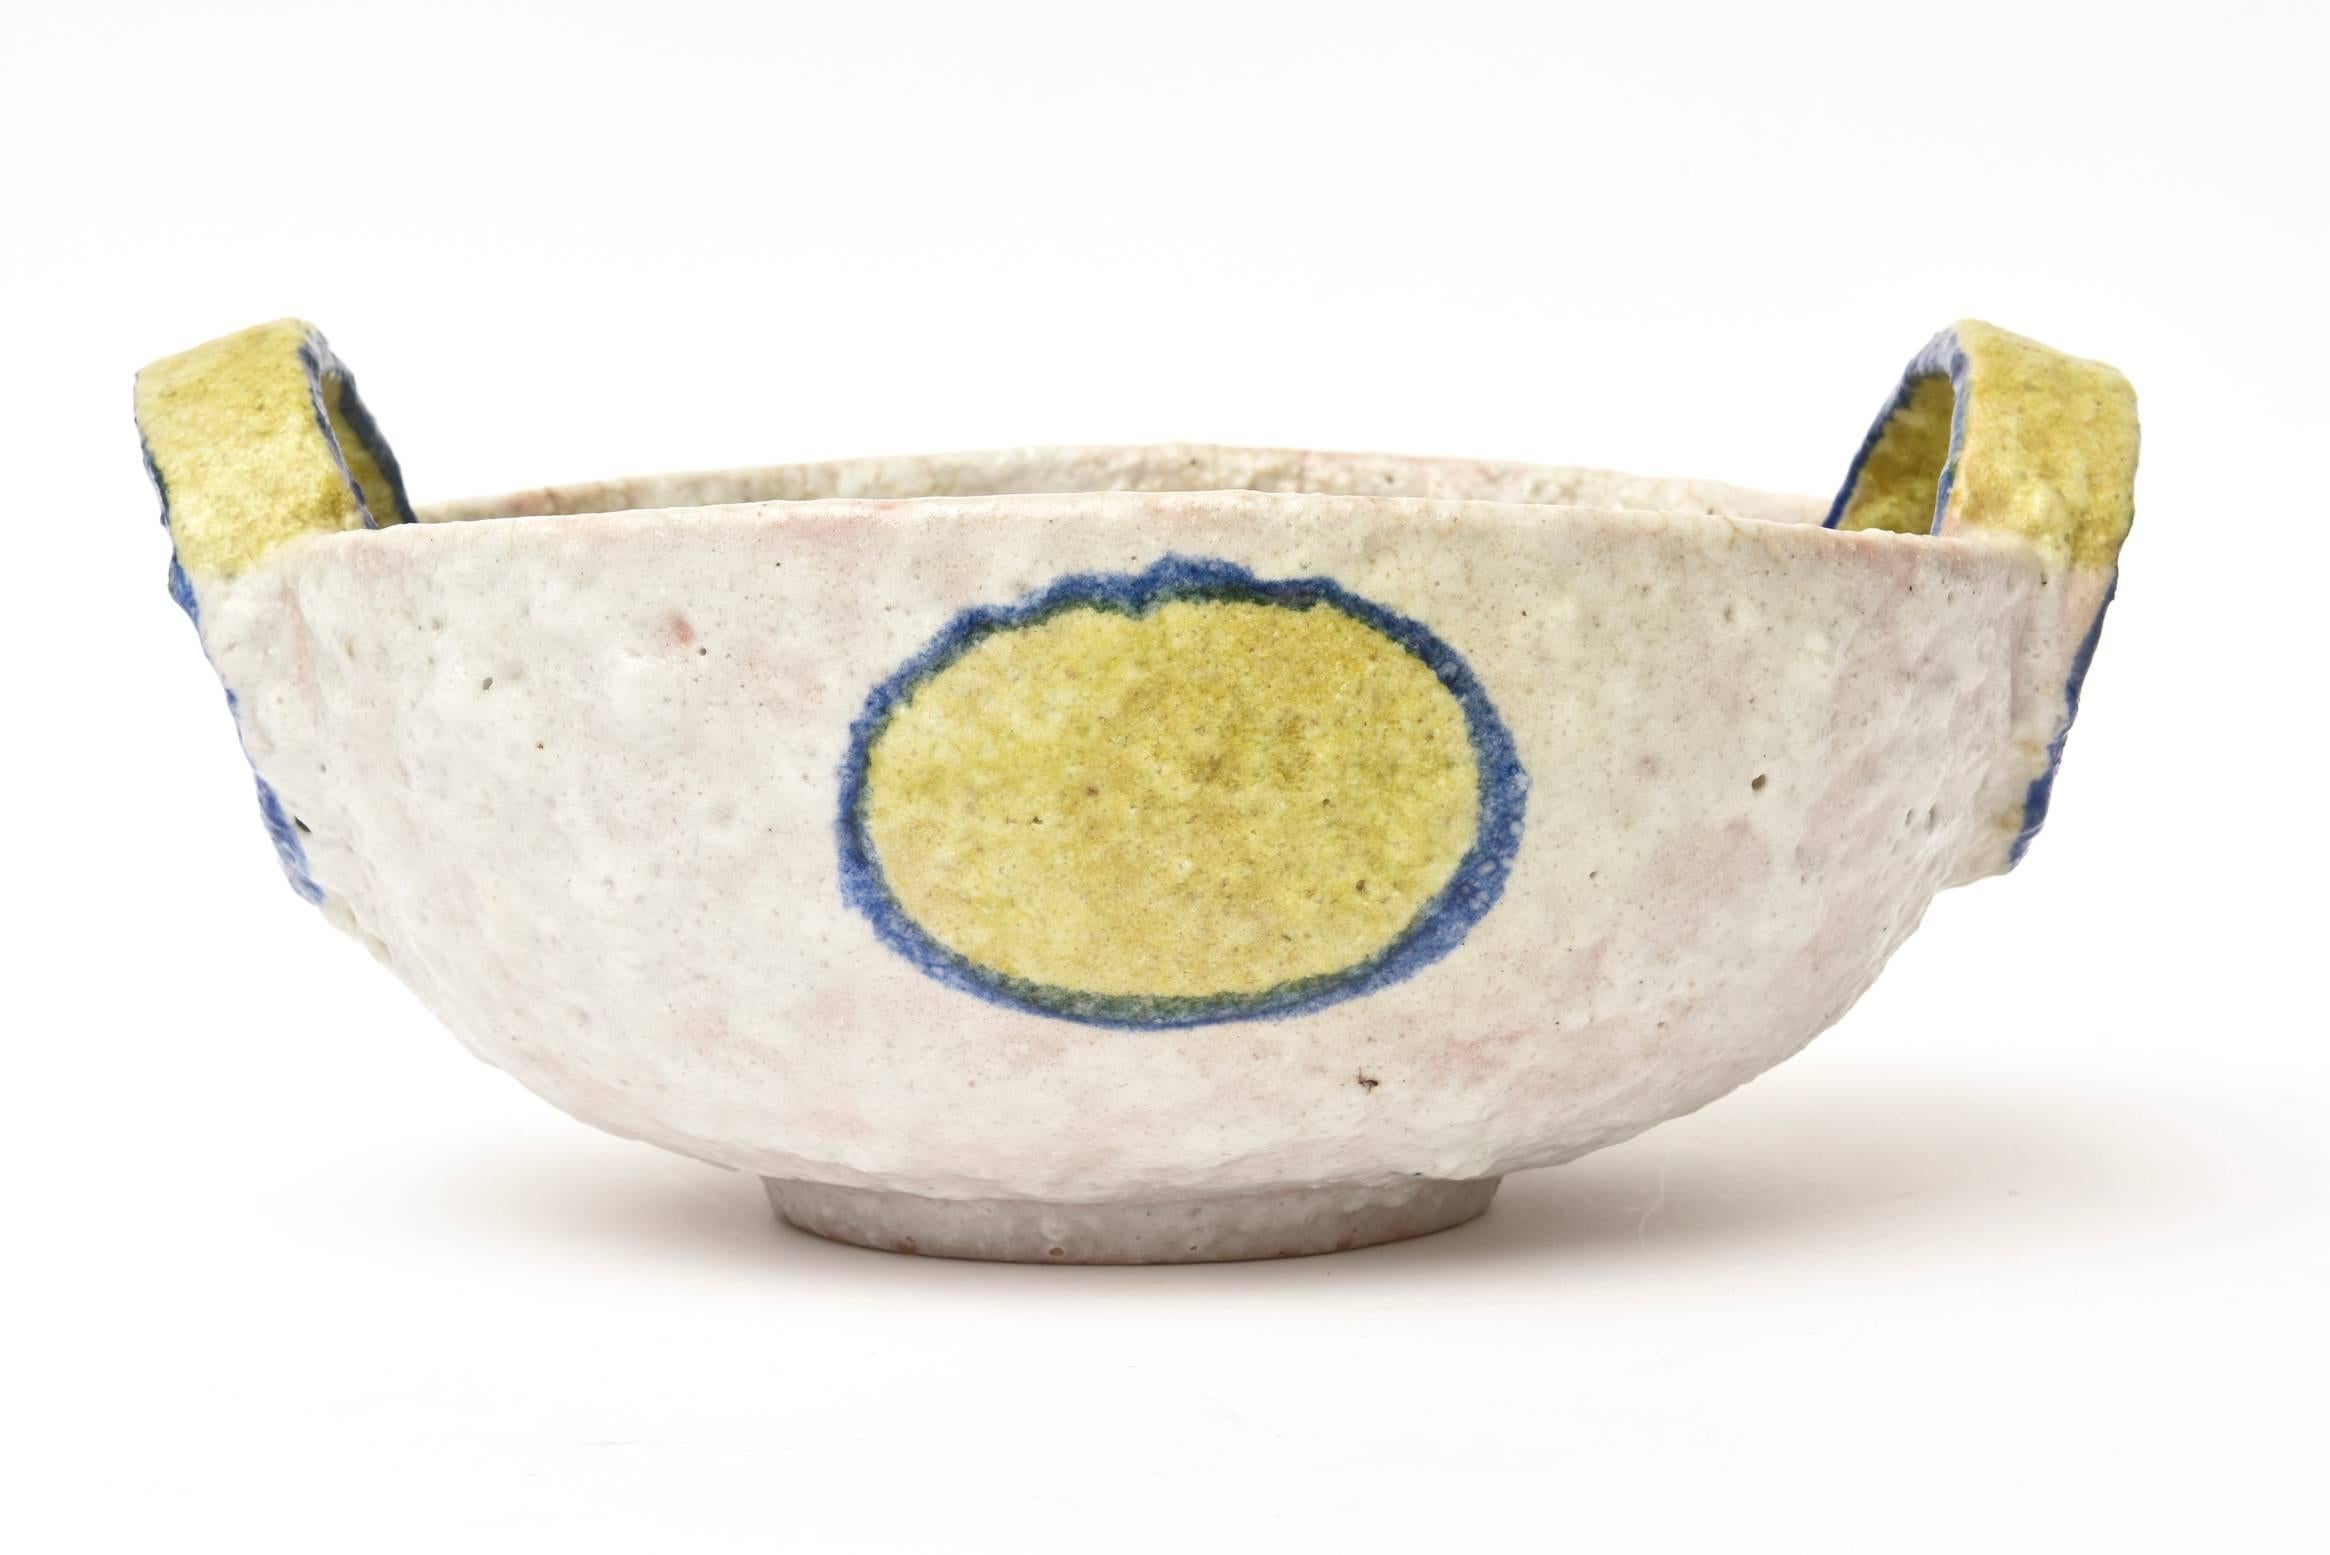 This sculptural and unusual Italian ceramic bowl by Fantoni for Raymor bowl has an unusual color palette with pebbled textural surface. It is marked Italy Raymor on the bottom with numbers. The height to the top not the handle top is 5.5